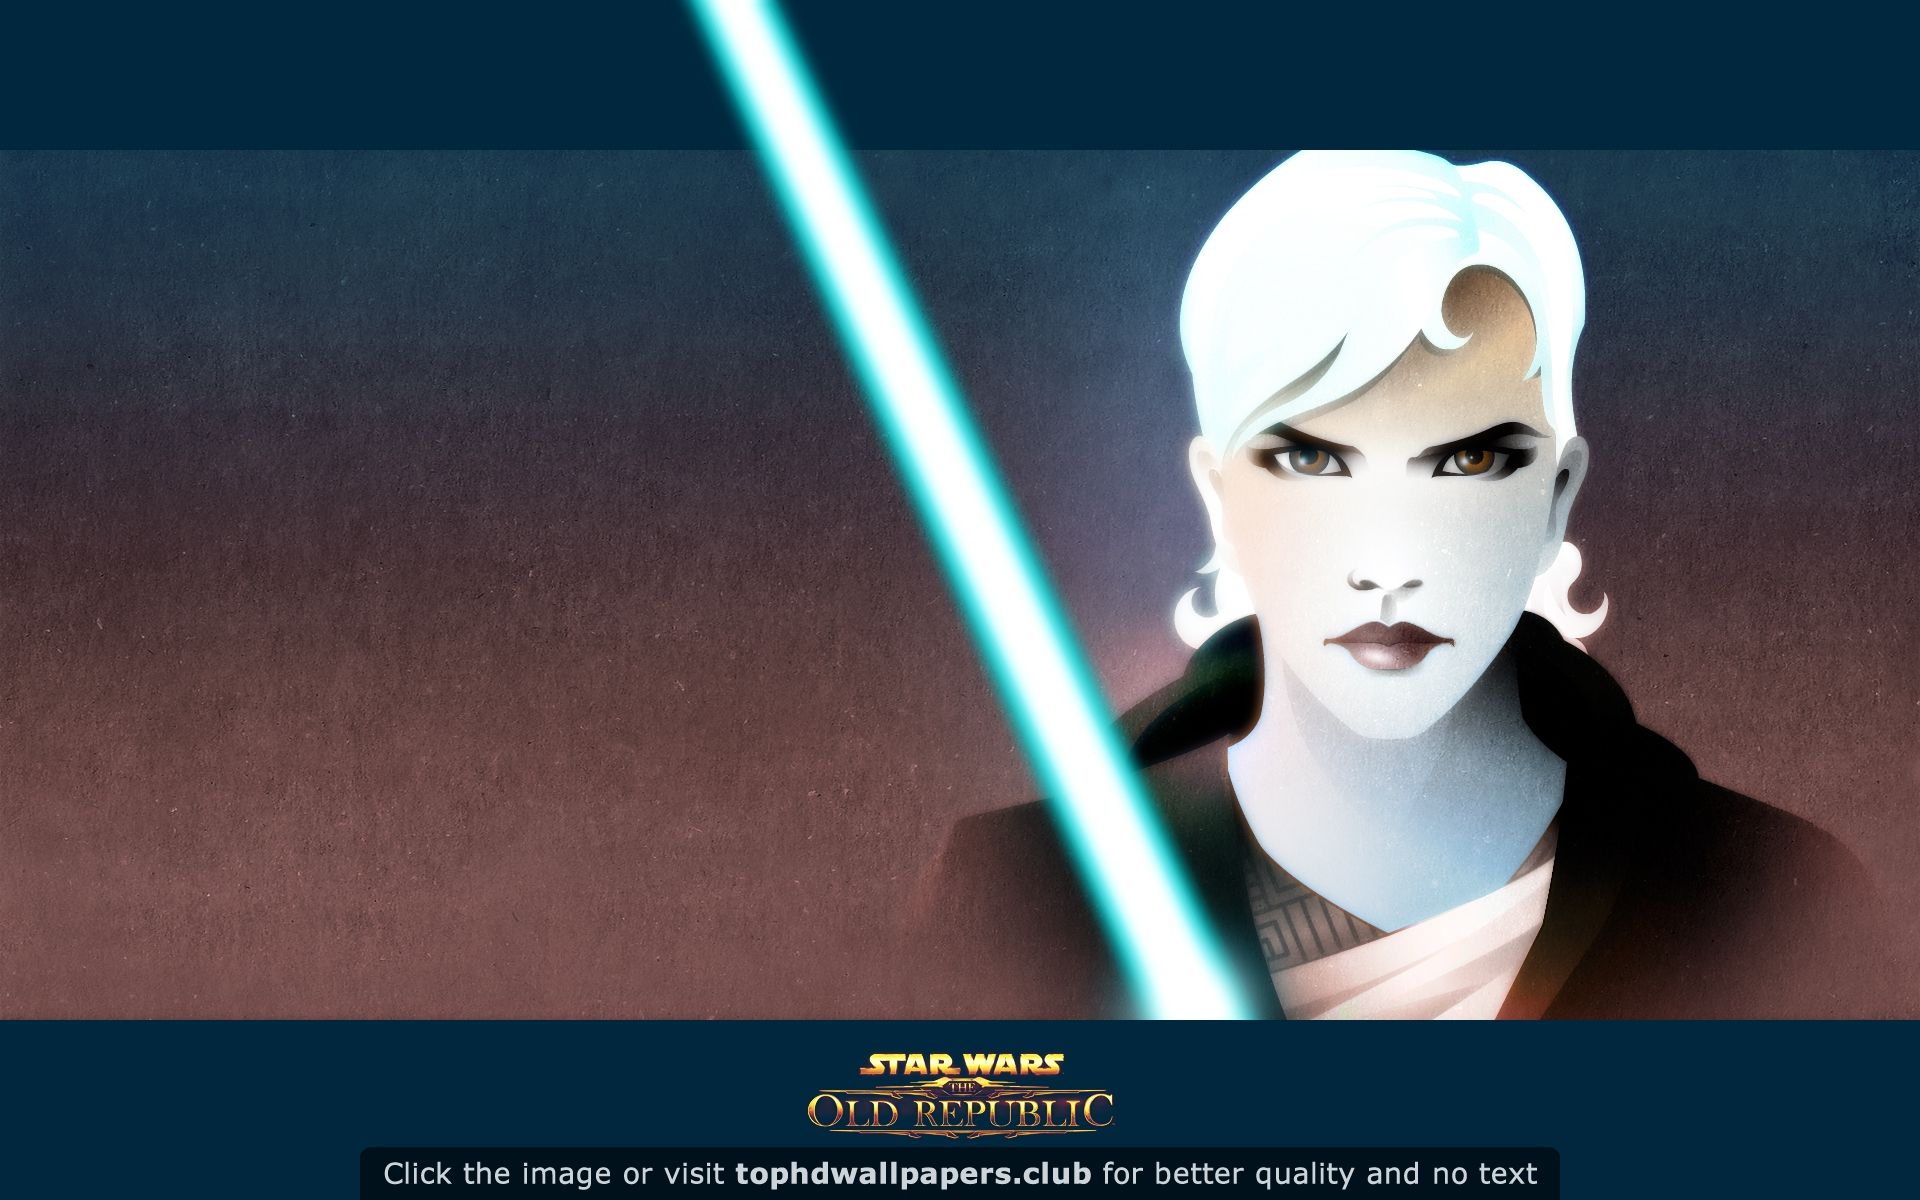 Swtor Backgrounds 4K or HD wallpaper for your PC, Mac or Mobile device